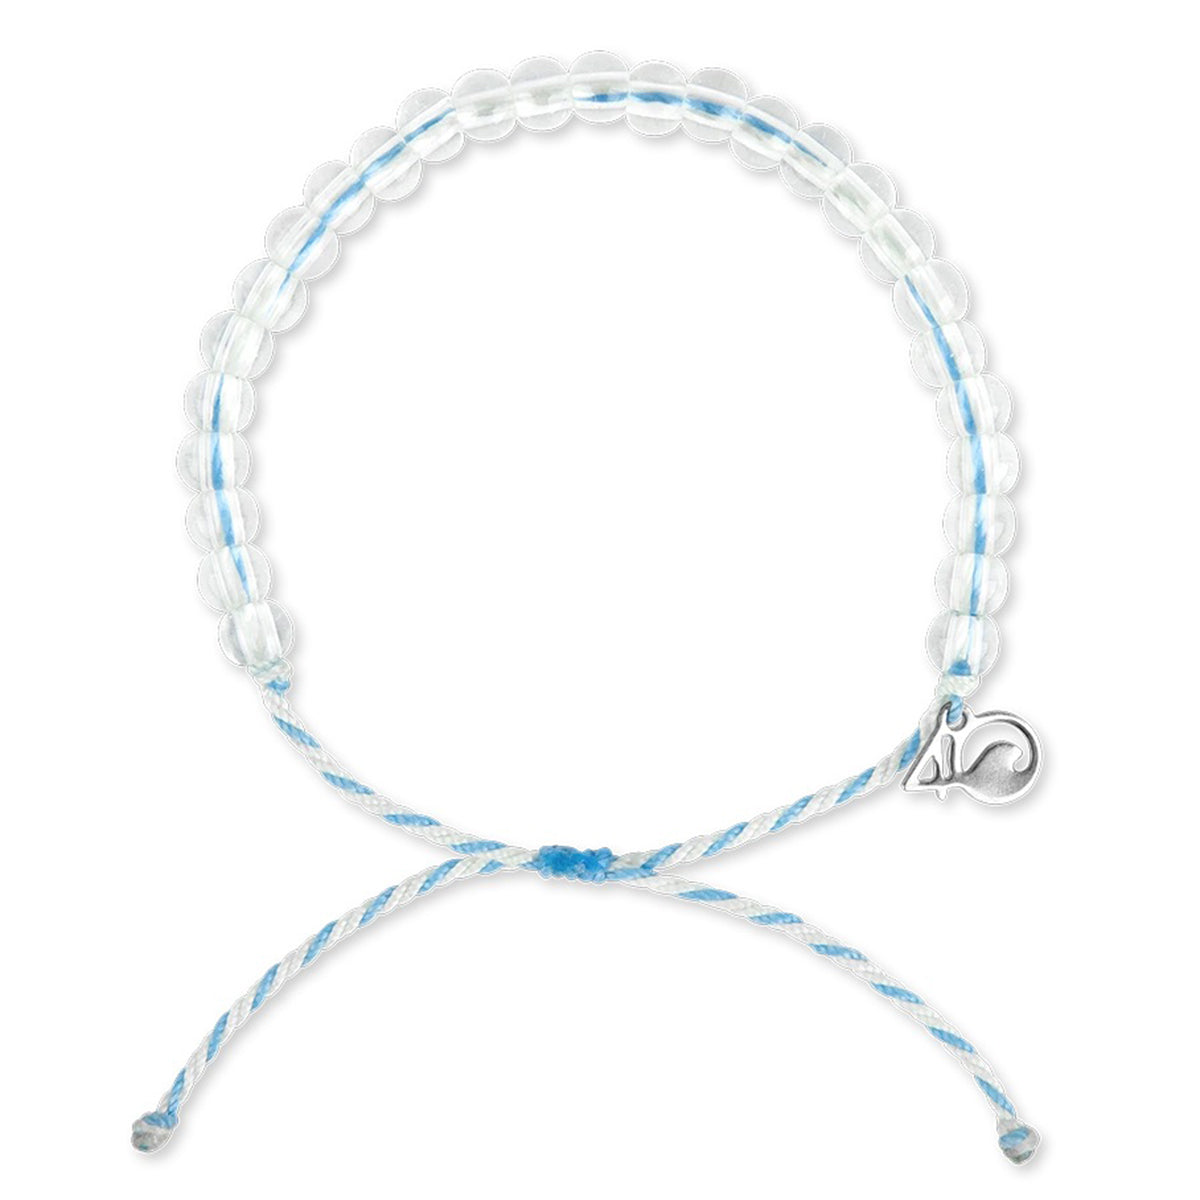 Adjustable 4Ocean Beluga Whale bracelet with clear and blue beads made from recycled materials on a white background.